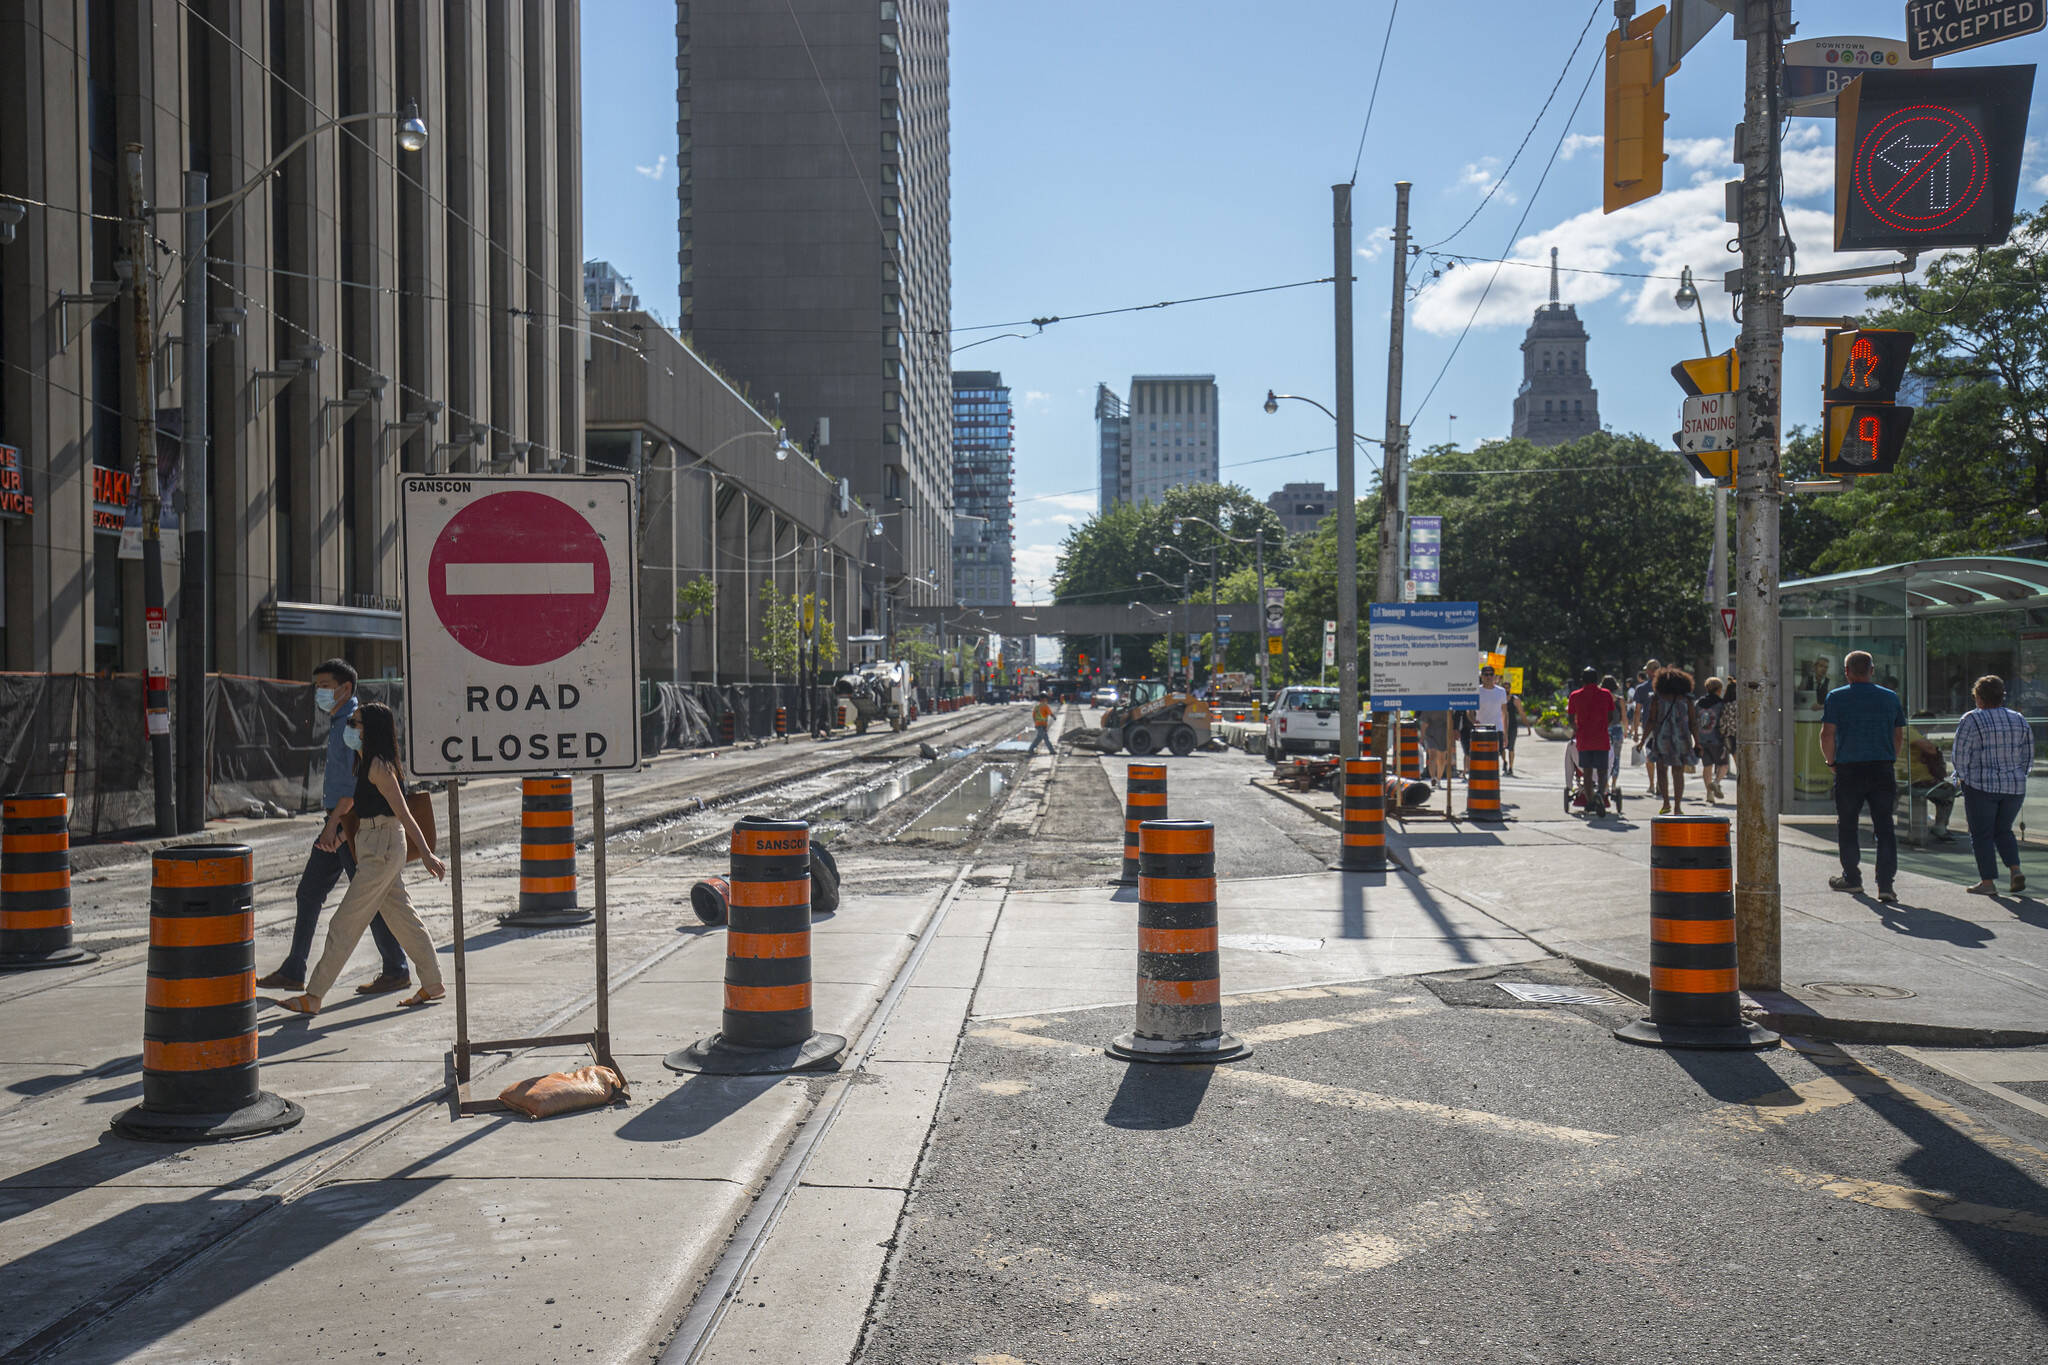 https://media.blogto.com/articles/20230412-ontario-line-road-closures.jpg?w=2048&cmd=resize_then_crop&height=1365&quality=70